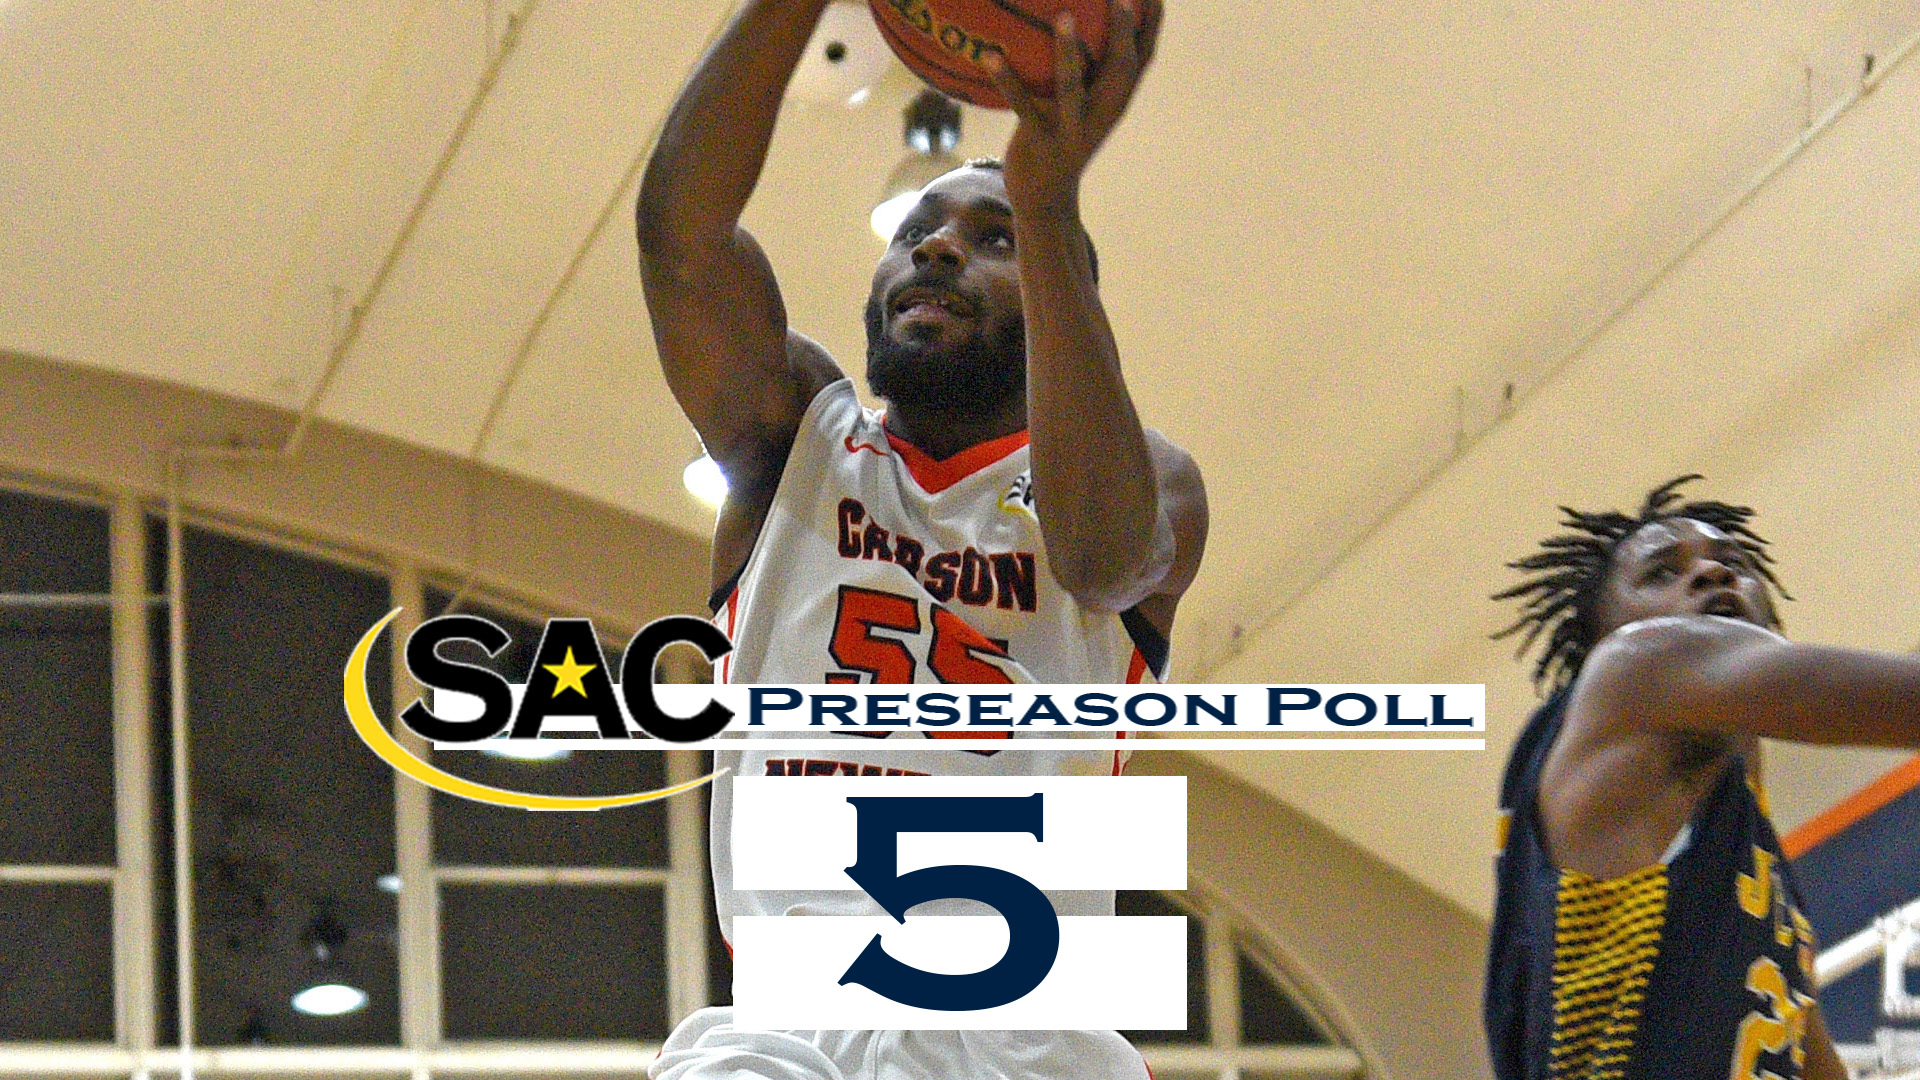 Eagles slotted fifth in annual preseason poll